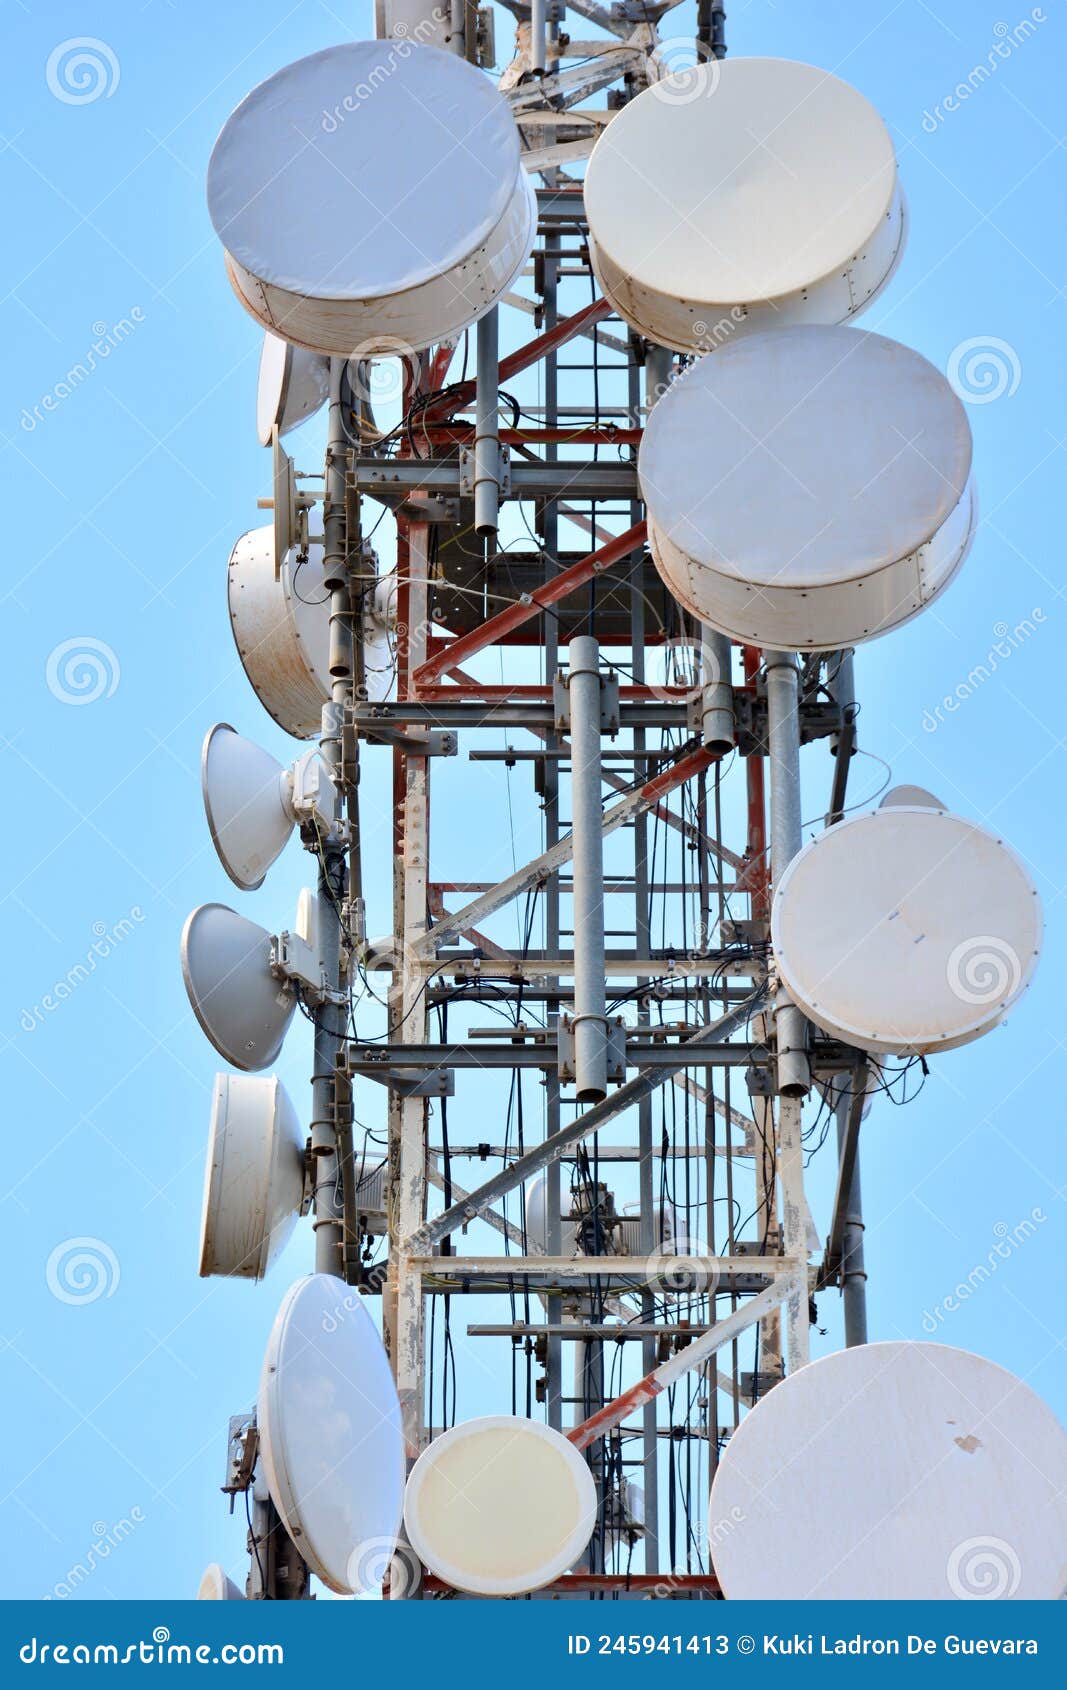 detail of a telecommunications tower